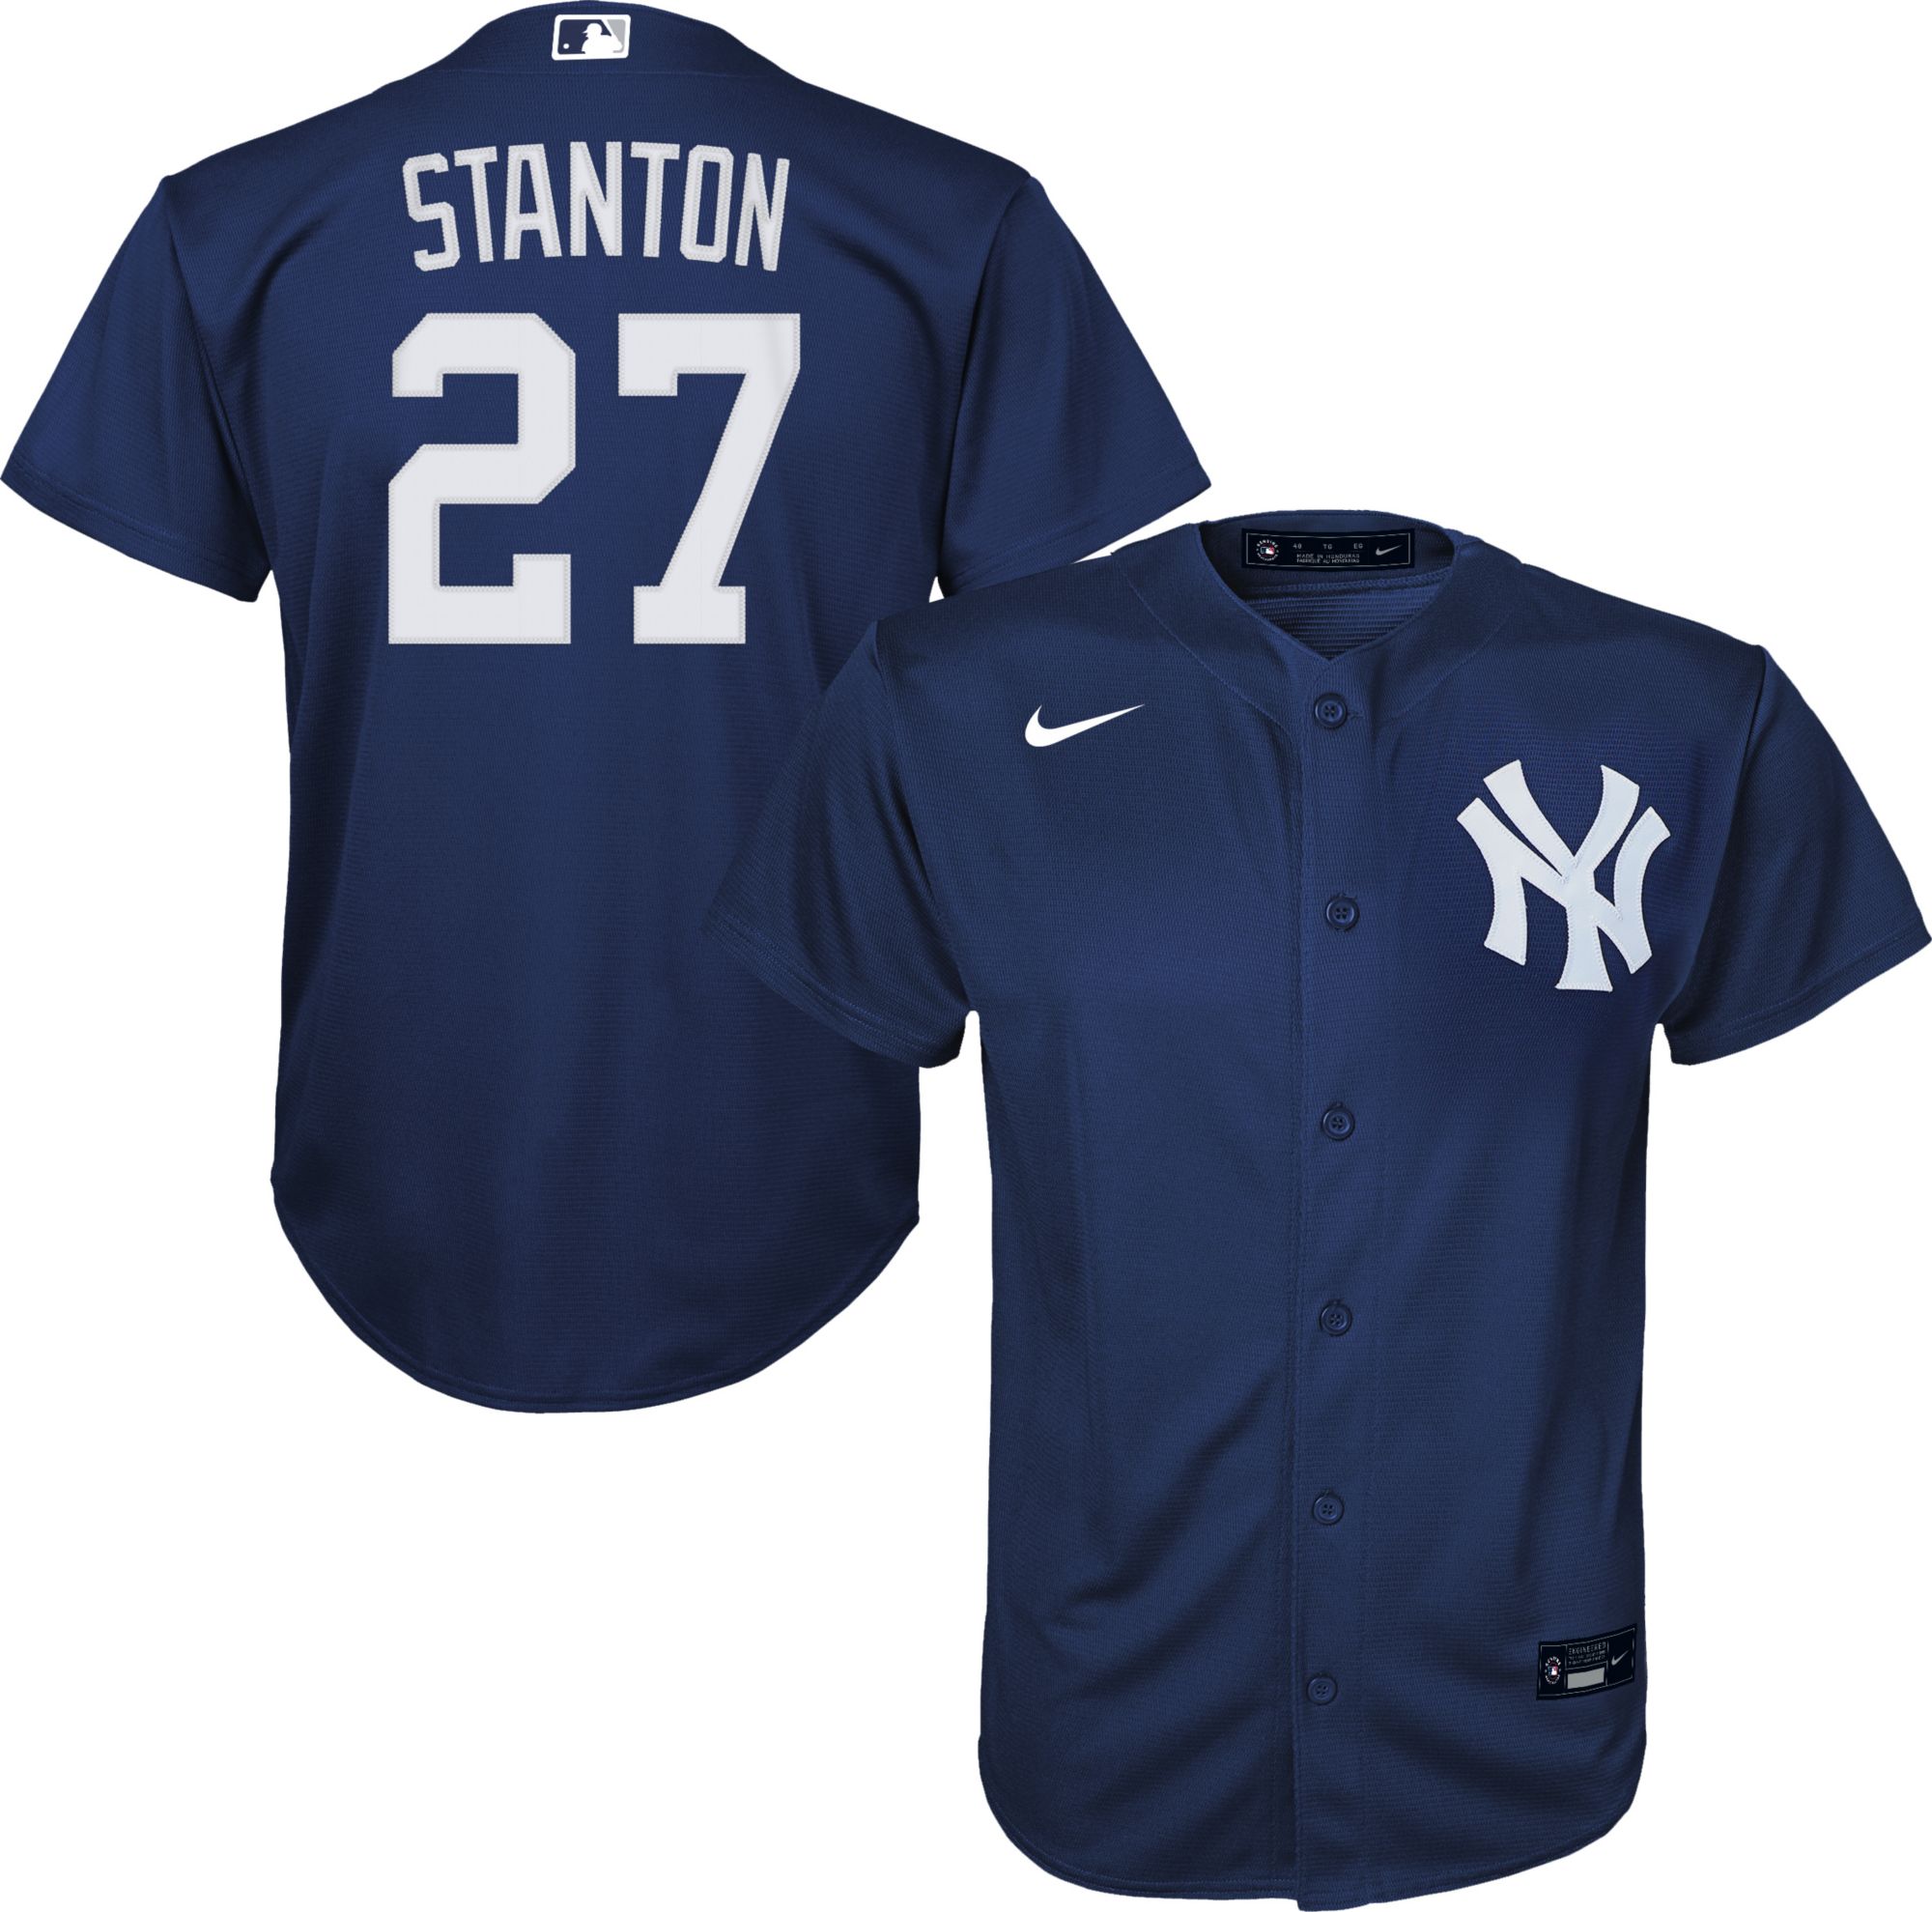 youth stanton jersey